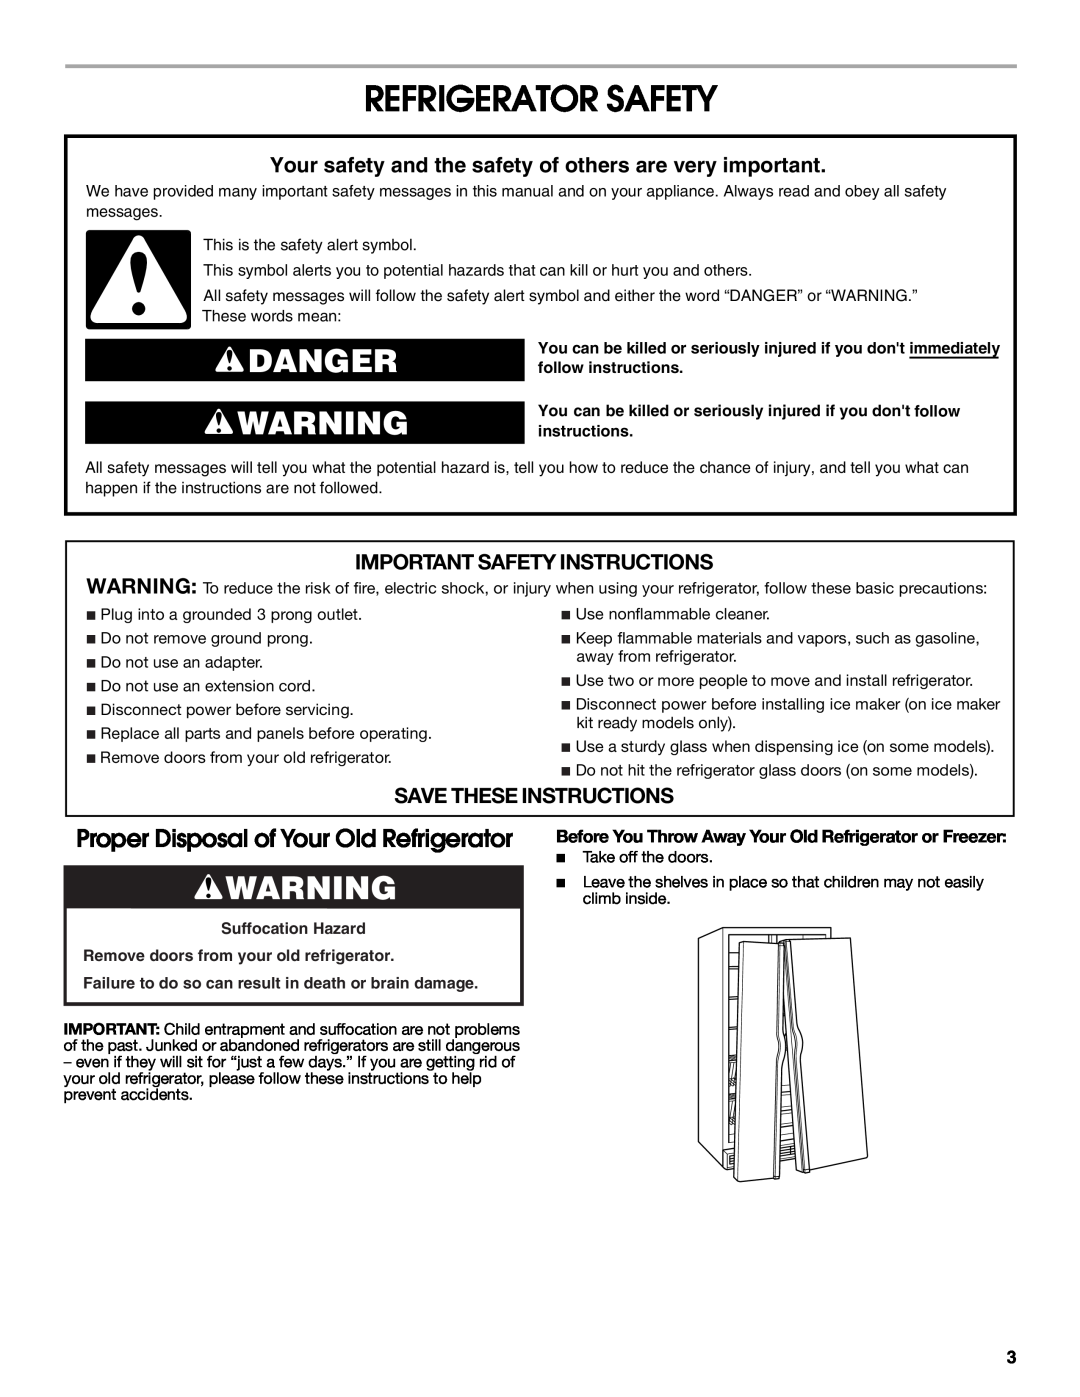 Jenn-Air W10303988A Refrigerator Safety, Danger, Proper Disposal of Your Old Refrigerator, Important Safety Instructions 